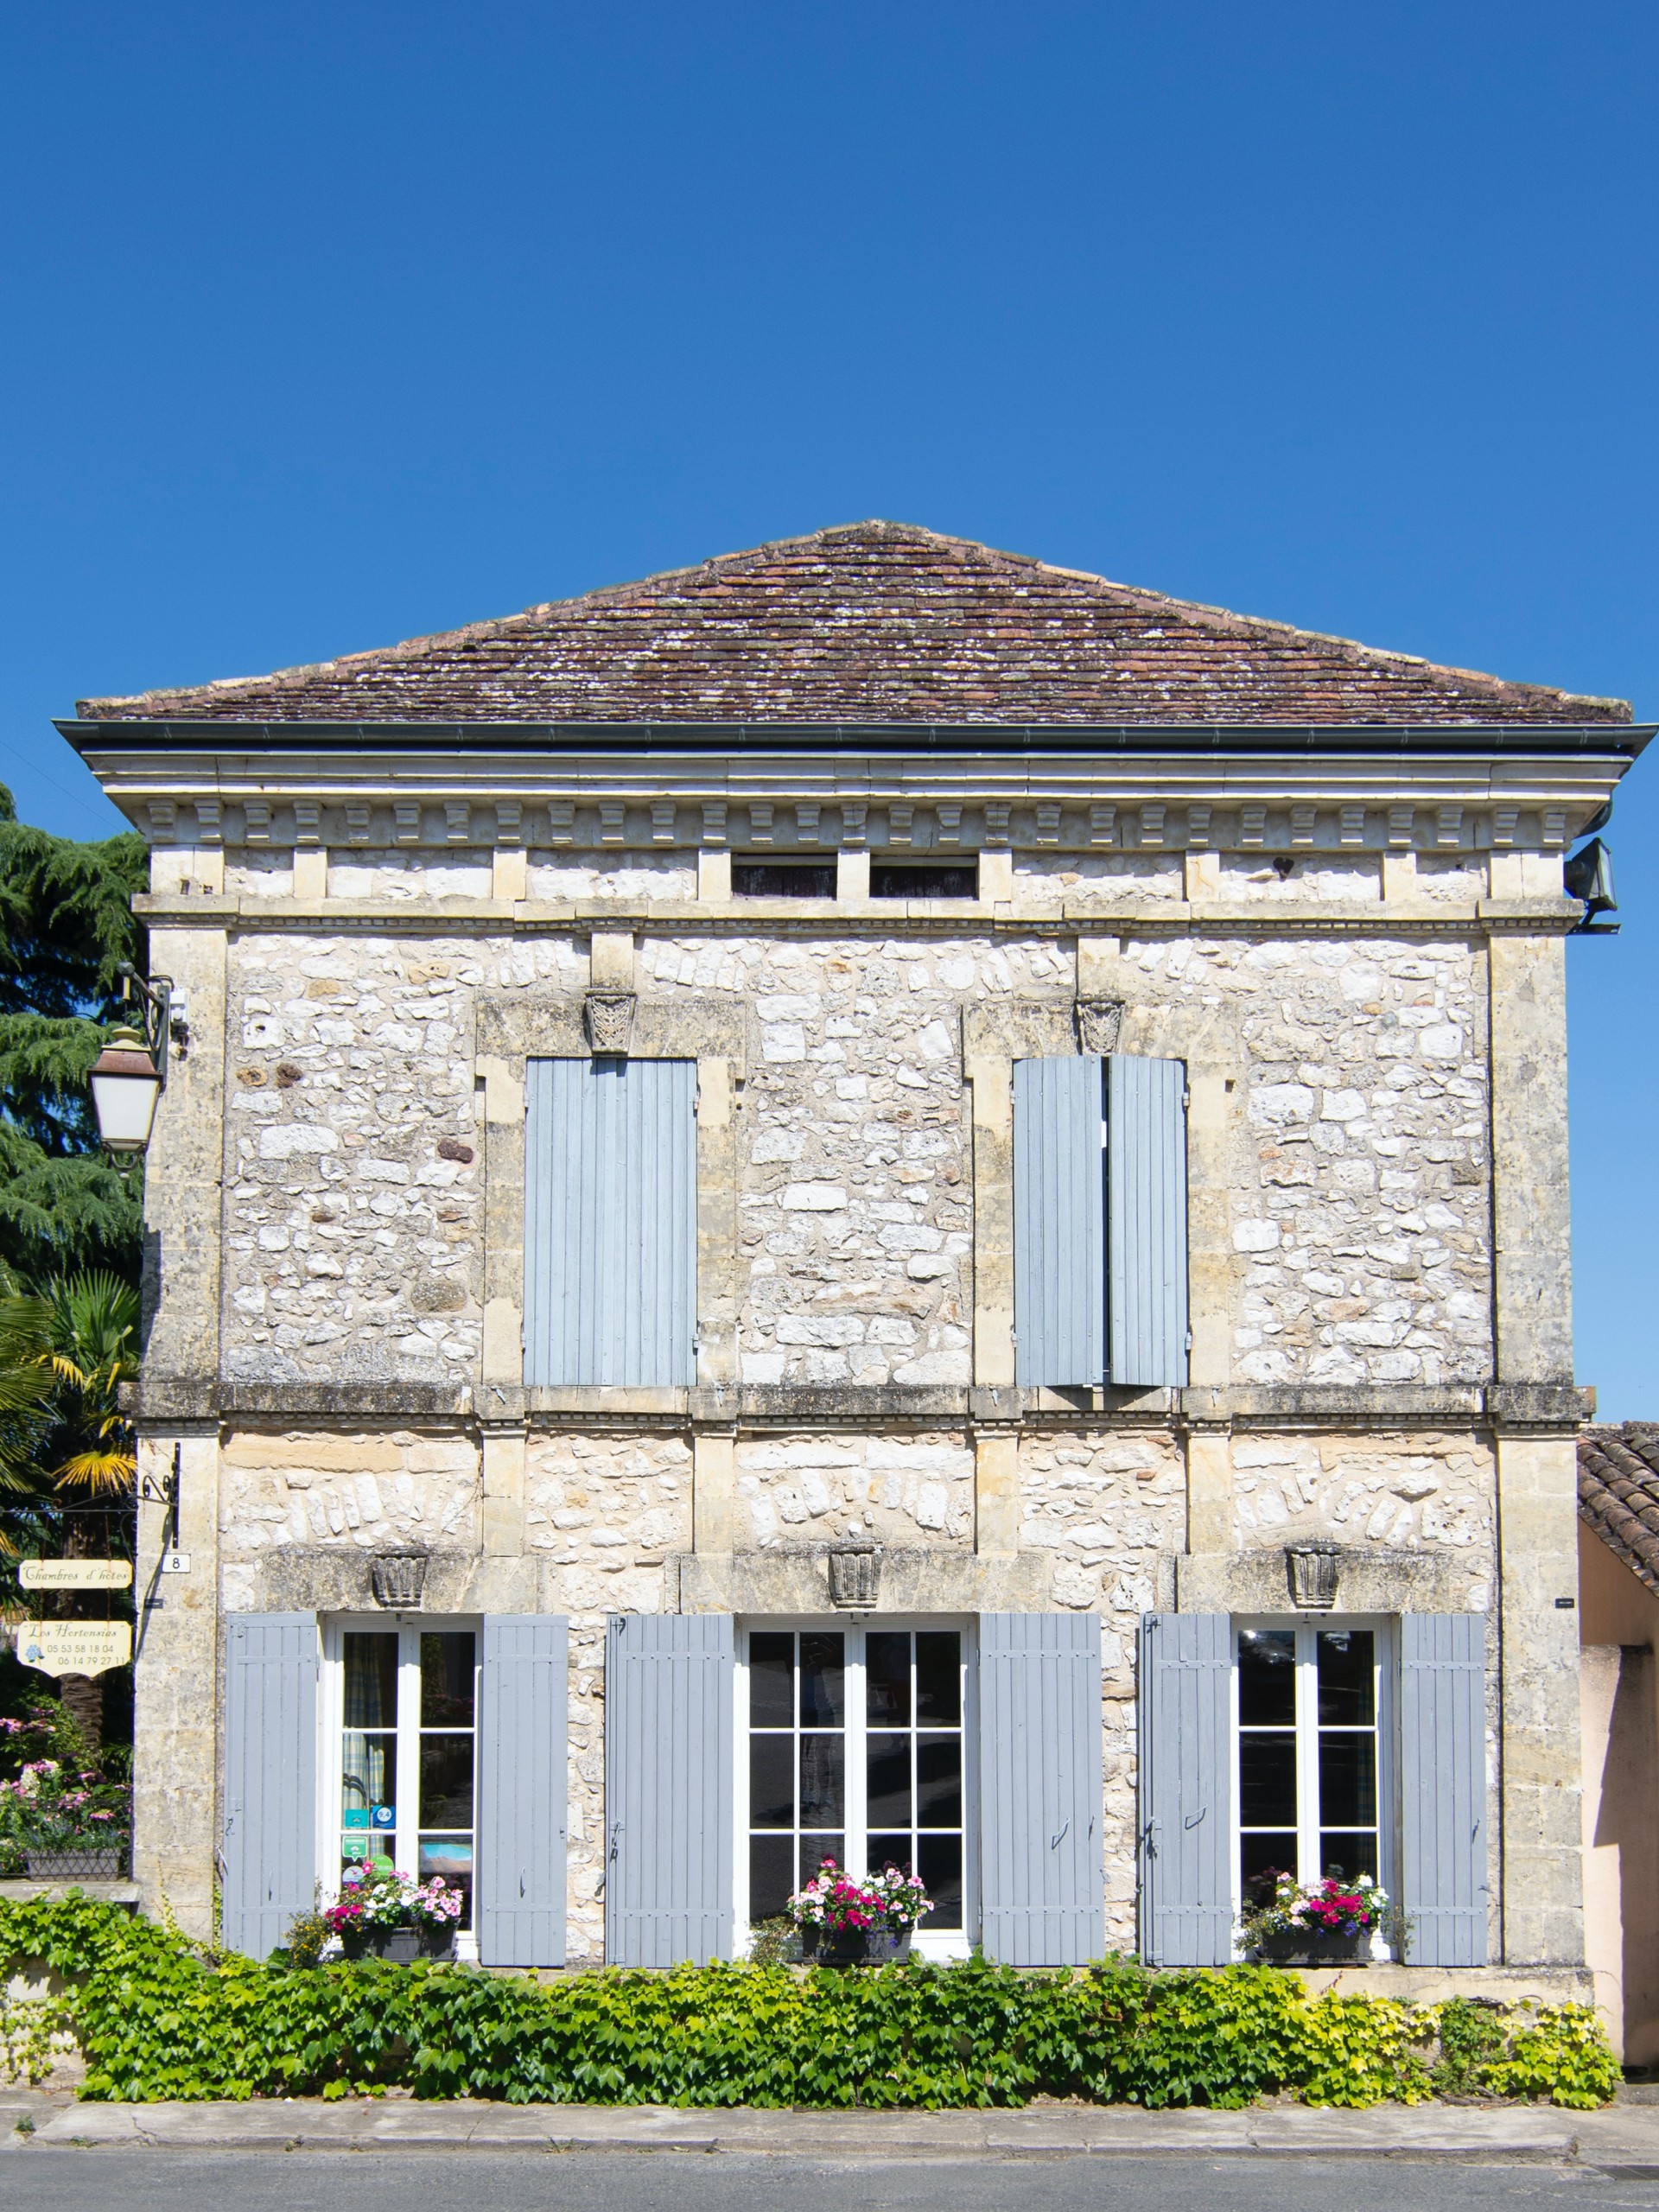 French architecture, as seen on self-guided Dordogne tour